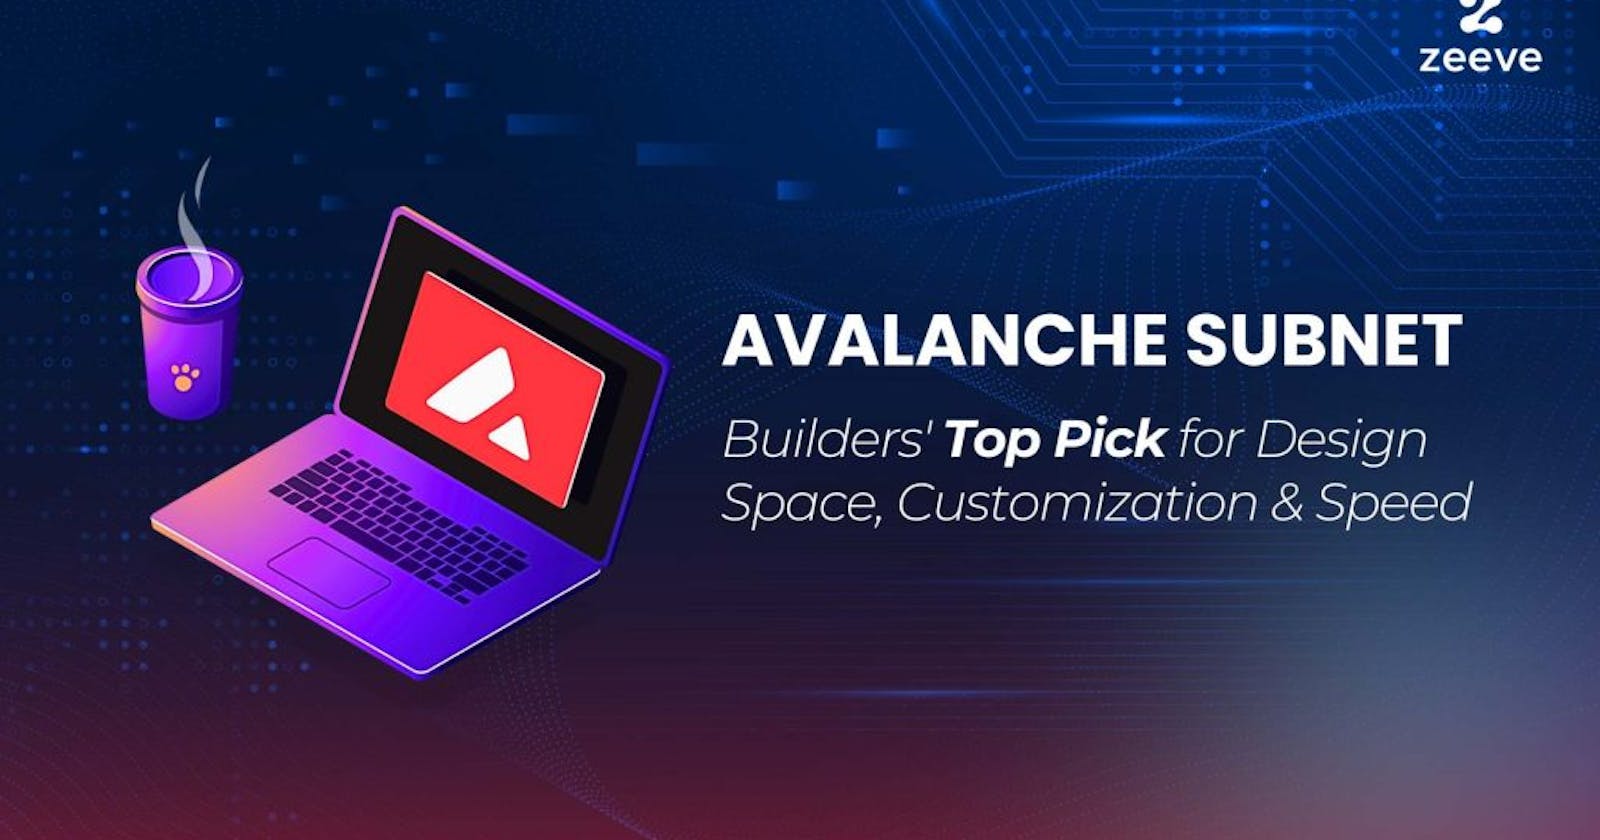 Why Build on Avalanche Subnets: Key Factors for its Adoption